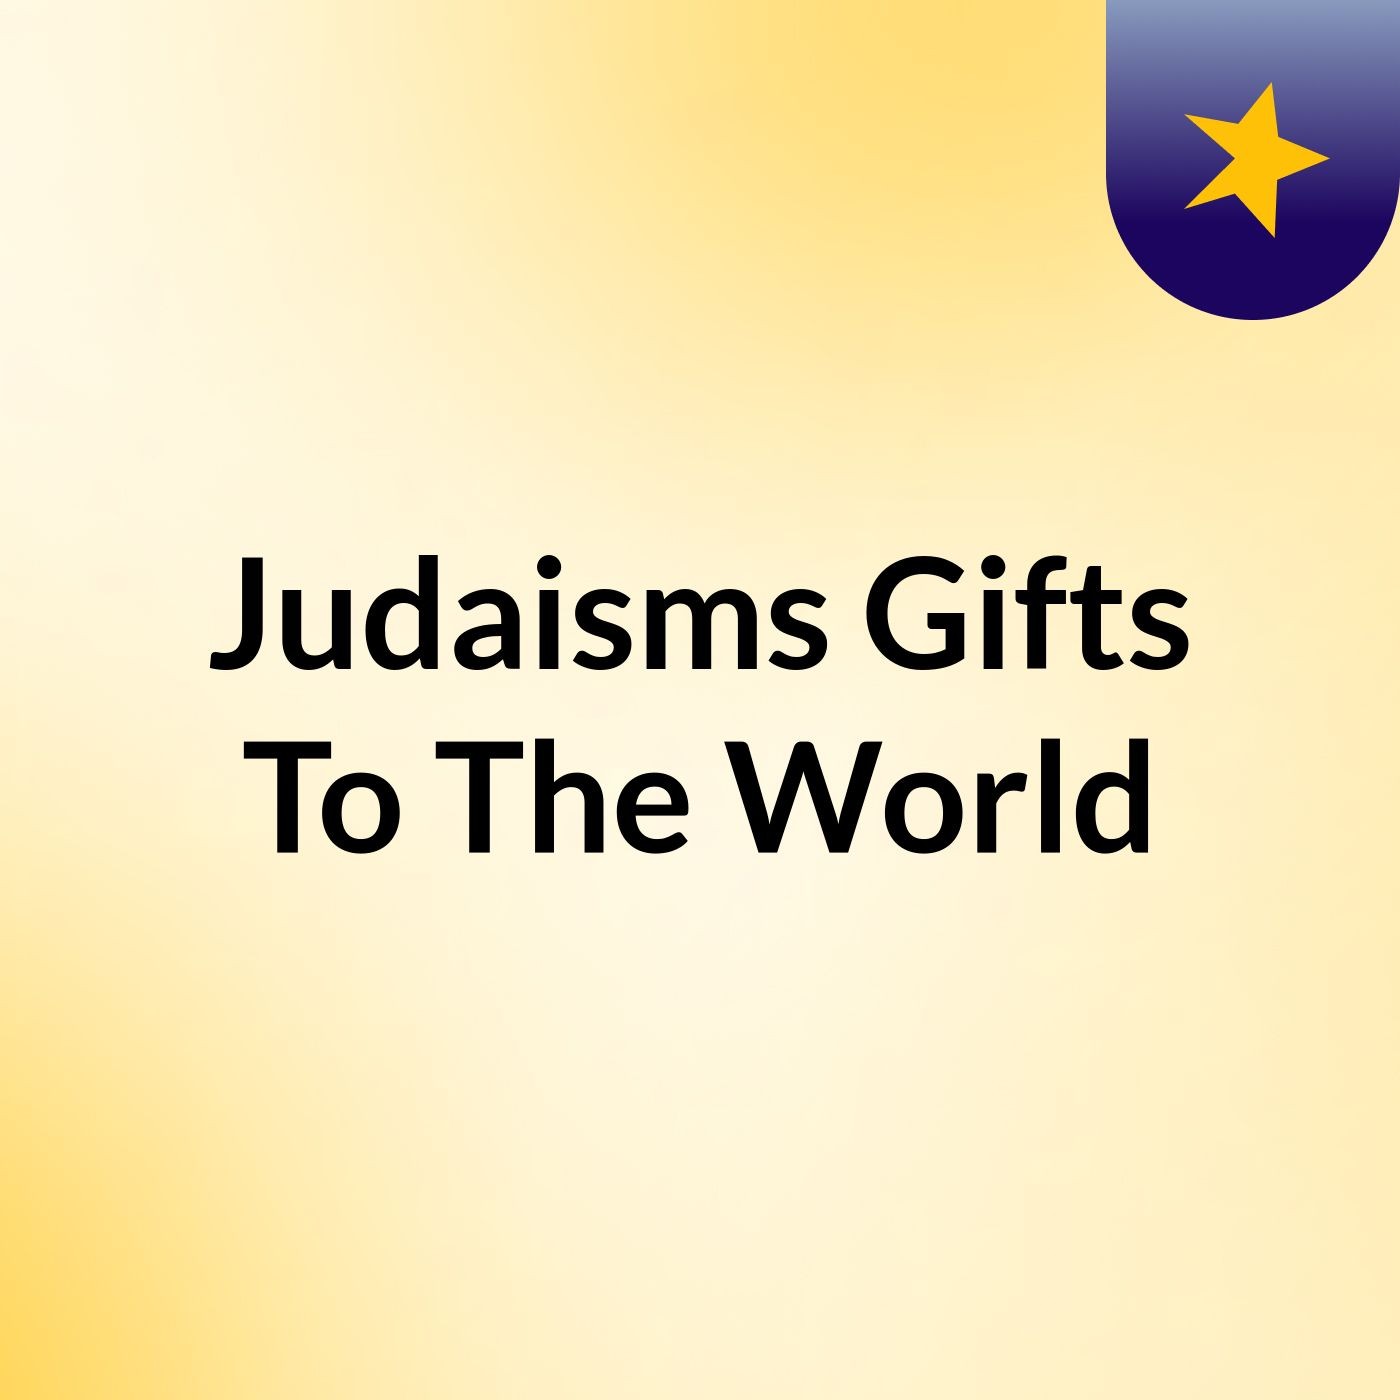 Judaisms Gifts To The World